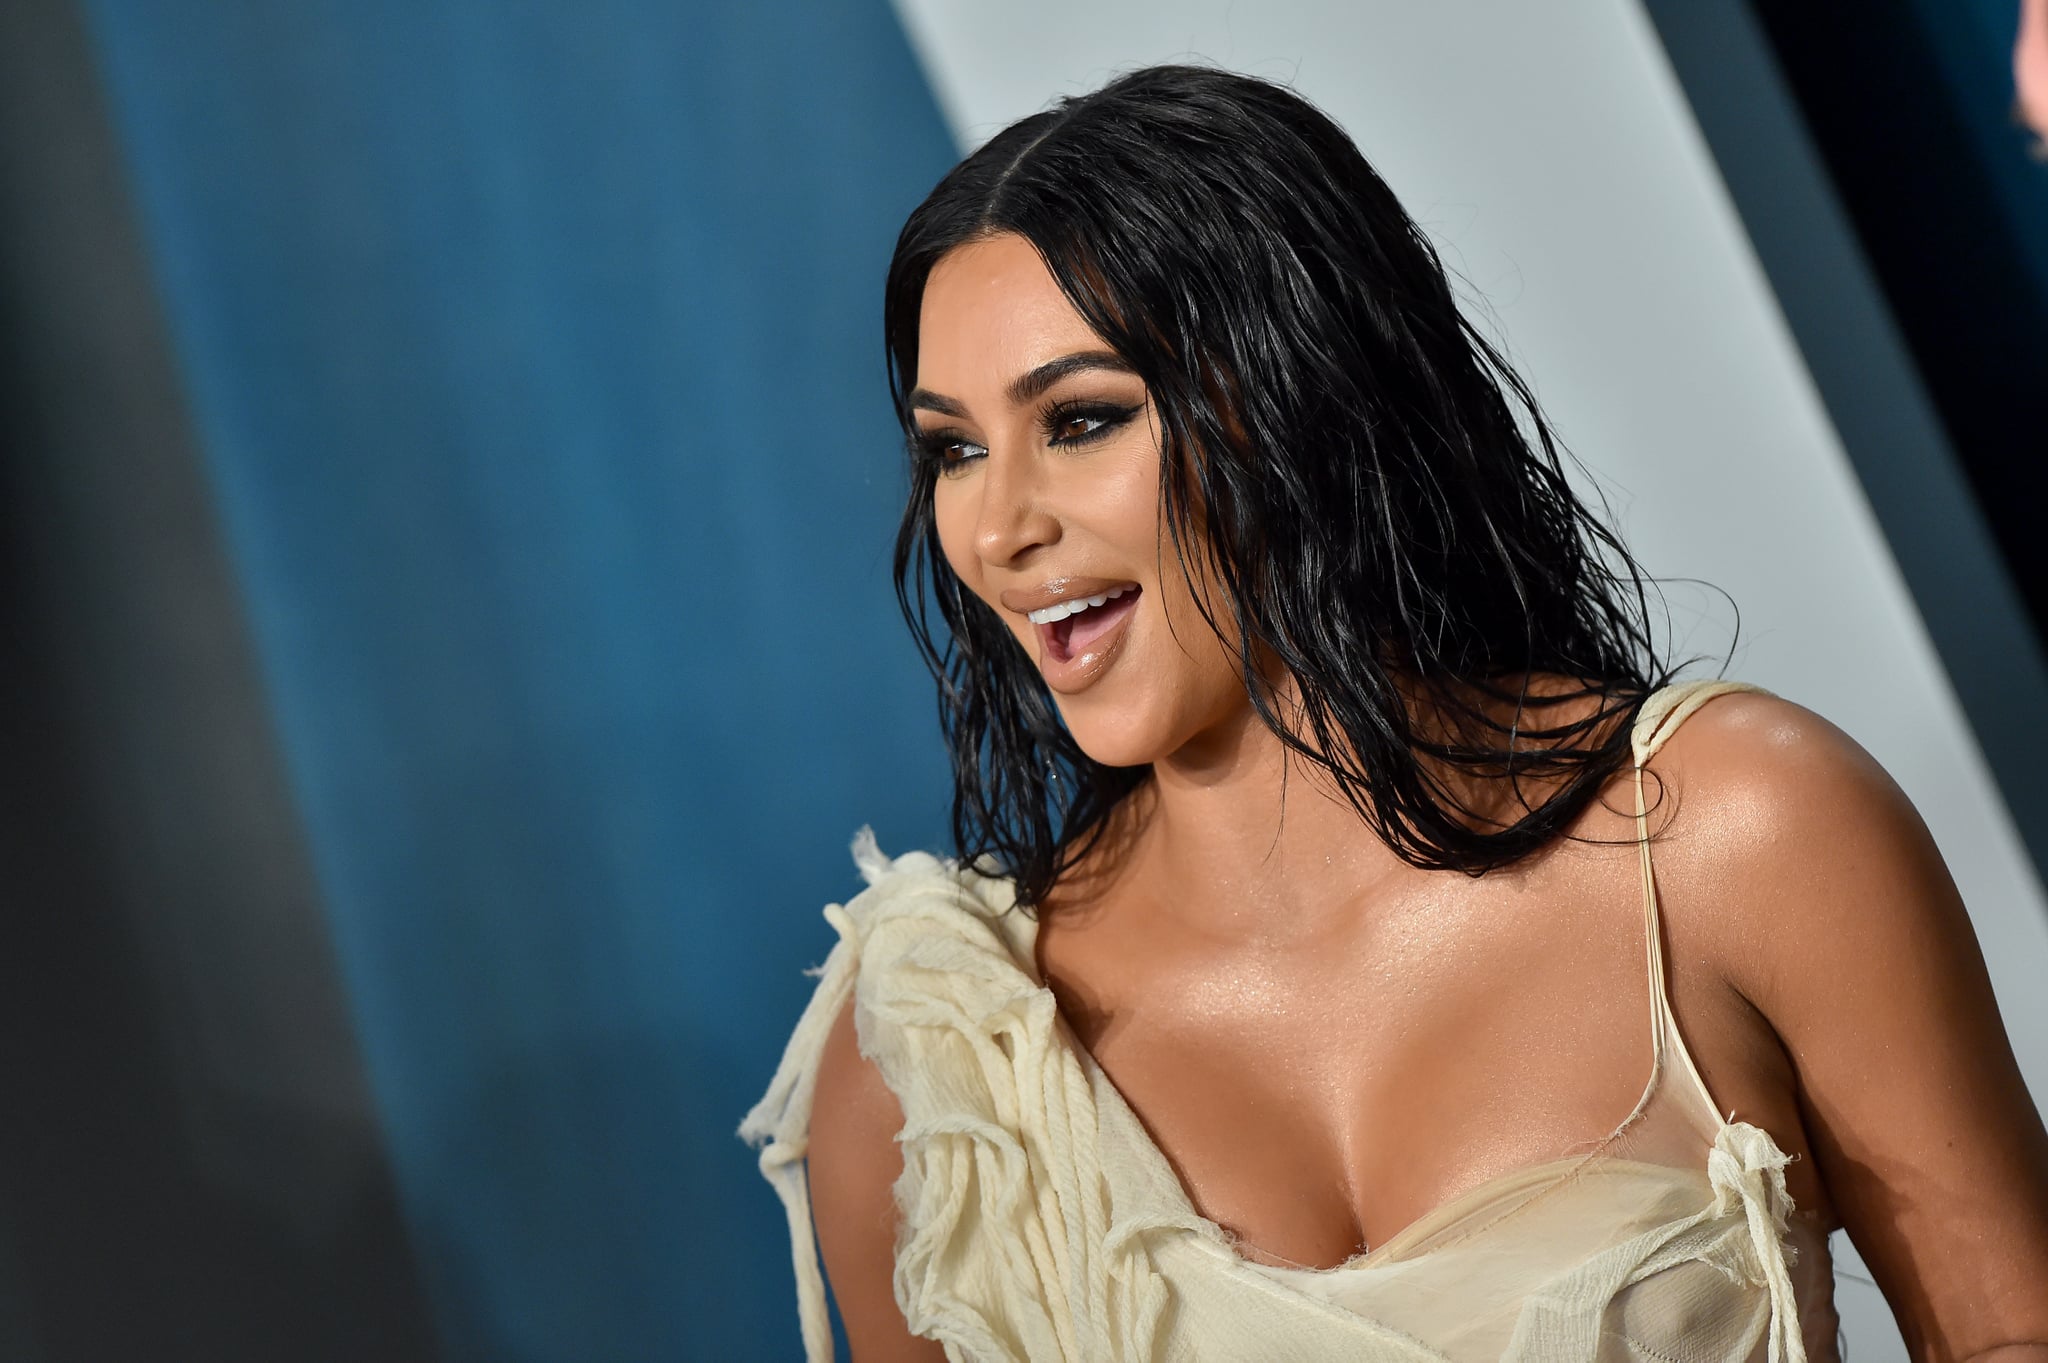 BEVERLY HILLS, CALIFORNIA - FEBRUARY 09: Kim Kardashian West attends the 2020 Vanity Fair Oscar Party hosted by Radhika Jones at the Wallis Annenberg Center for the Performing Arts on February 09, 2020 in Beverly Hills, California.  (Photo by Axel/Bauer-Griffin/FilmMagic)